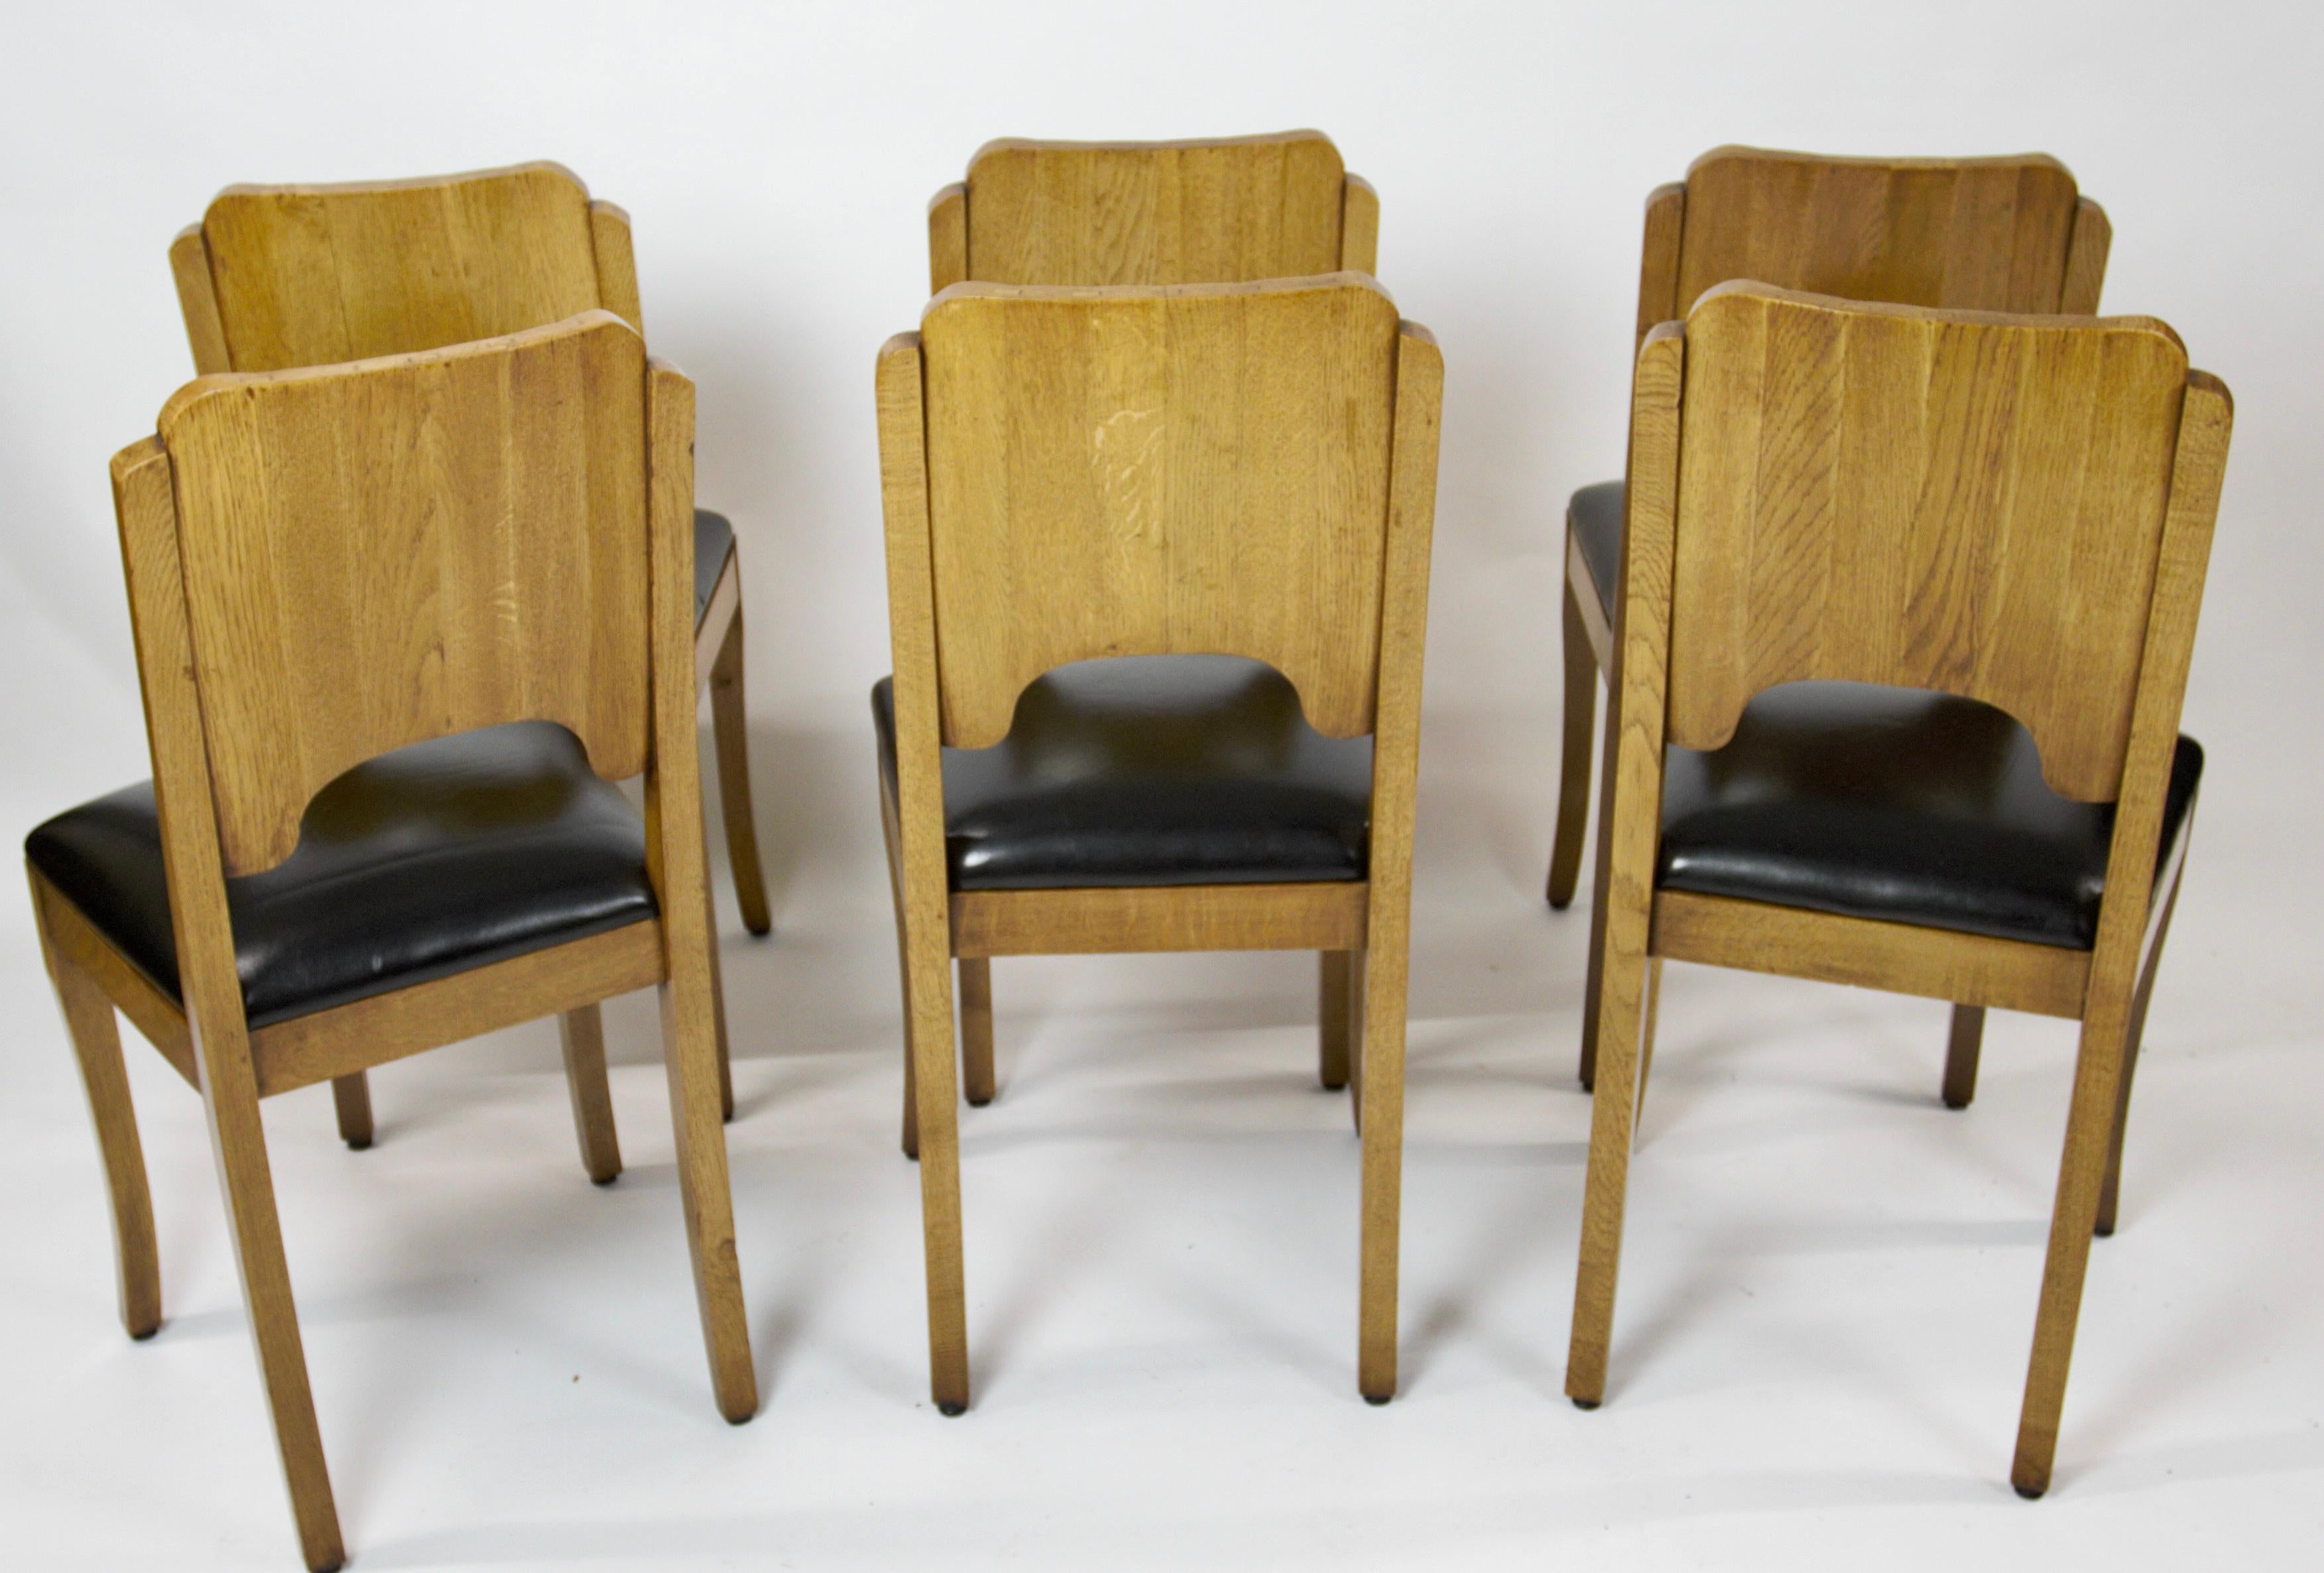 Fine Set 6 Art Deco Oak Dining Chairs circa 1930s
Curved Backs, with vertical panels, each bowfronted fixed by wedges on top & beneath
Arch Shape Under,
Black Leather seats, 
pair curved & splayed front legs, 
Recently Stripped Back & Bleached Then